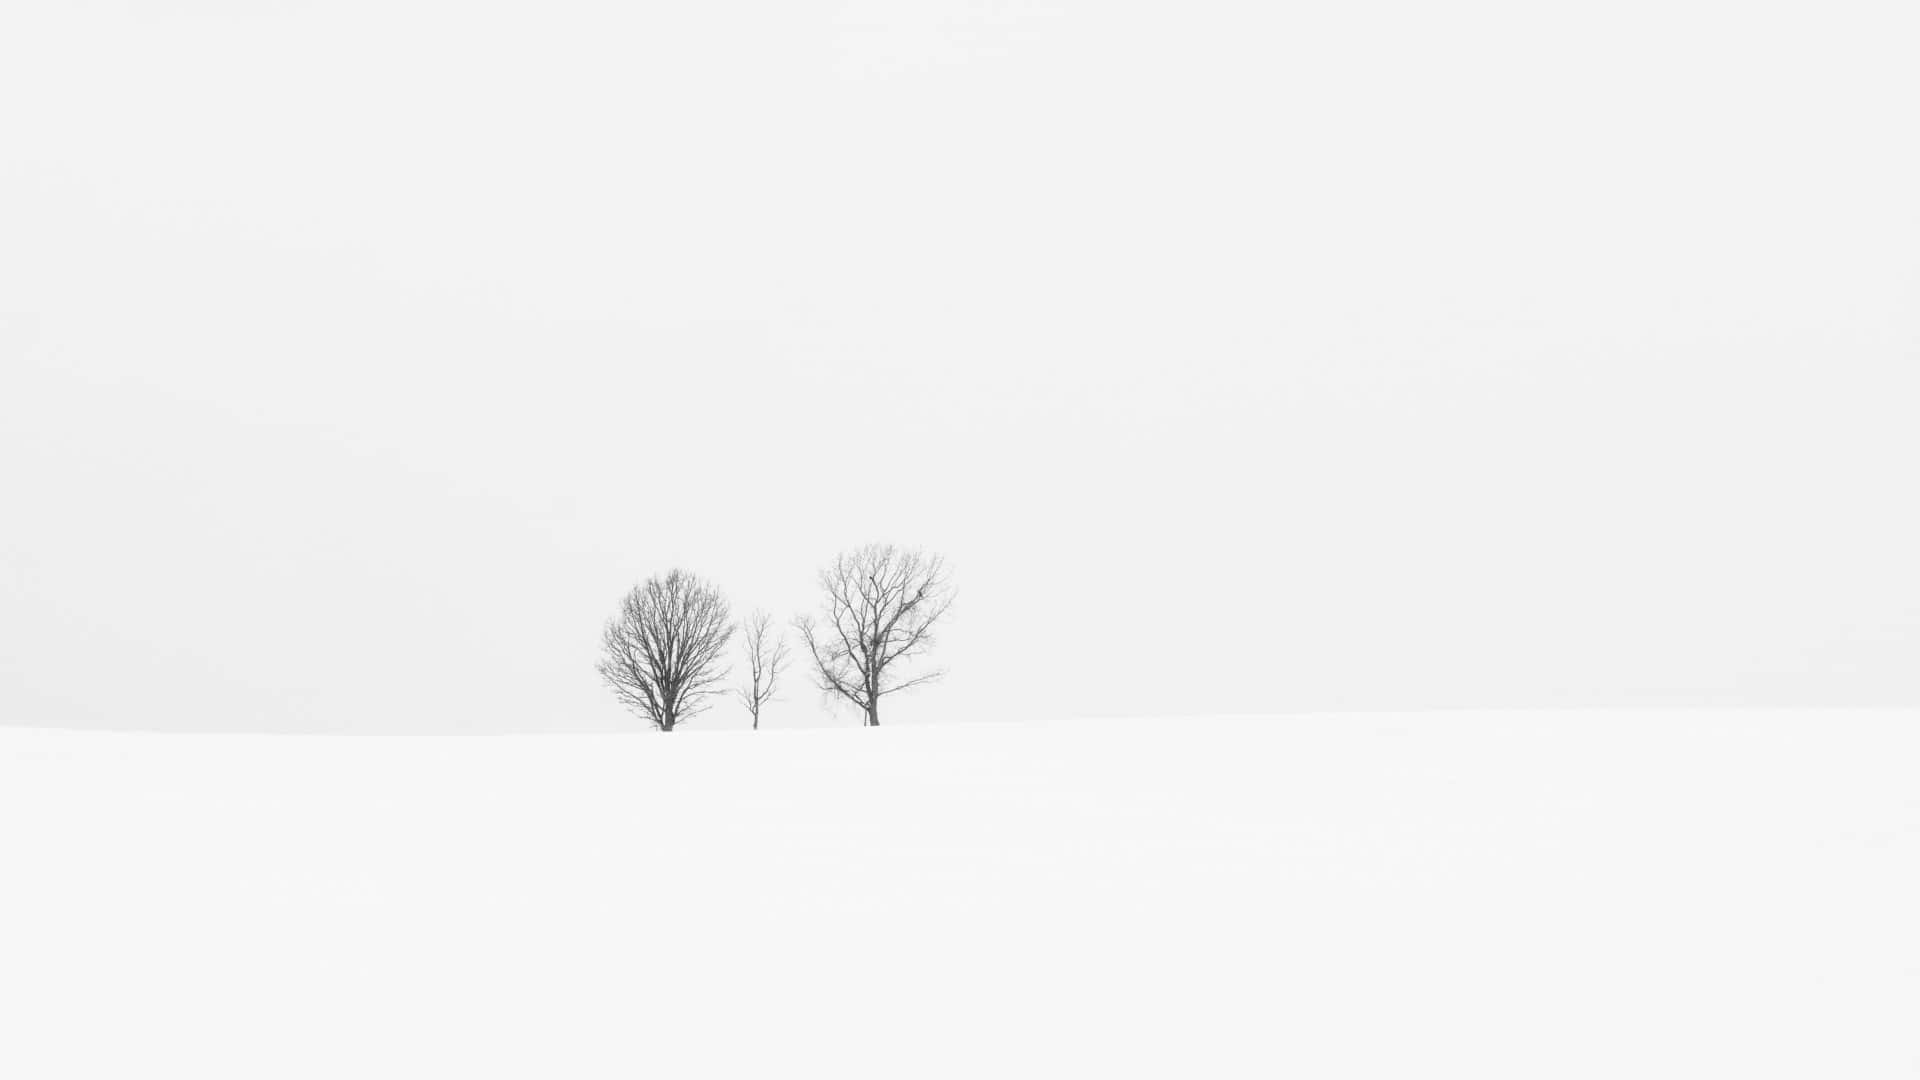 Intimate View of Winter Landscape Wallpaper